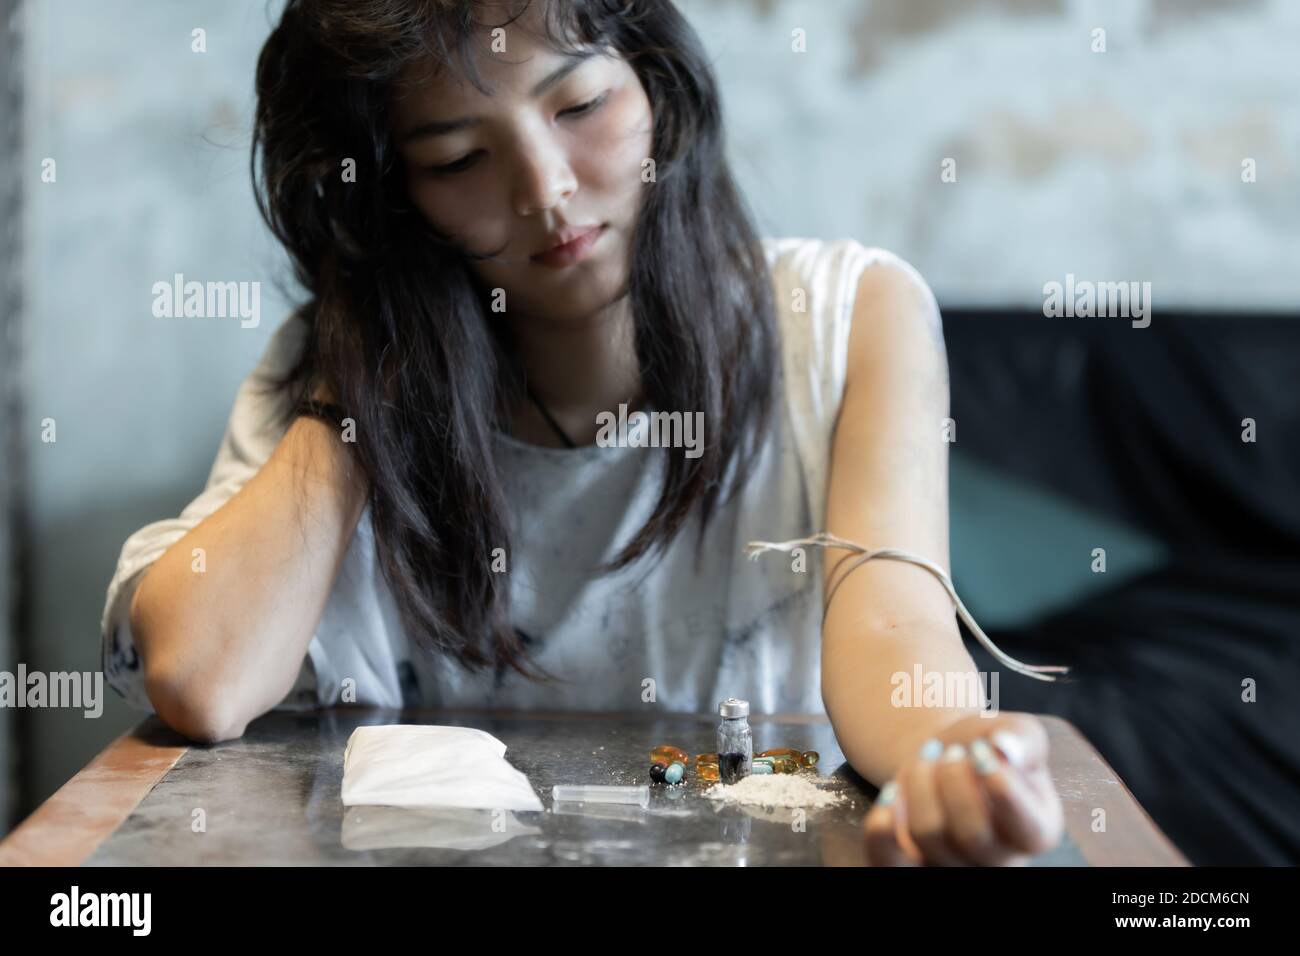 Asian Girl Using Drug Addict And Hopeless Concept Feeling Be Absent Minded Lonely Girl Concept 1715